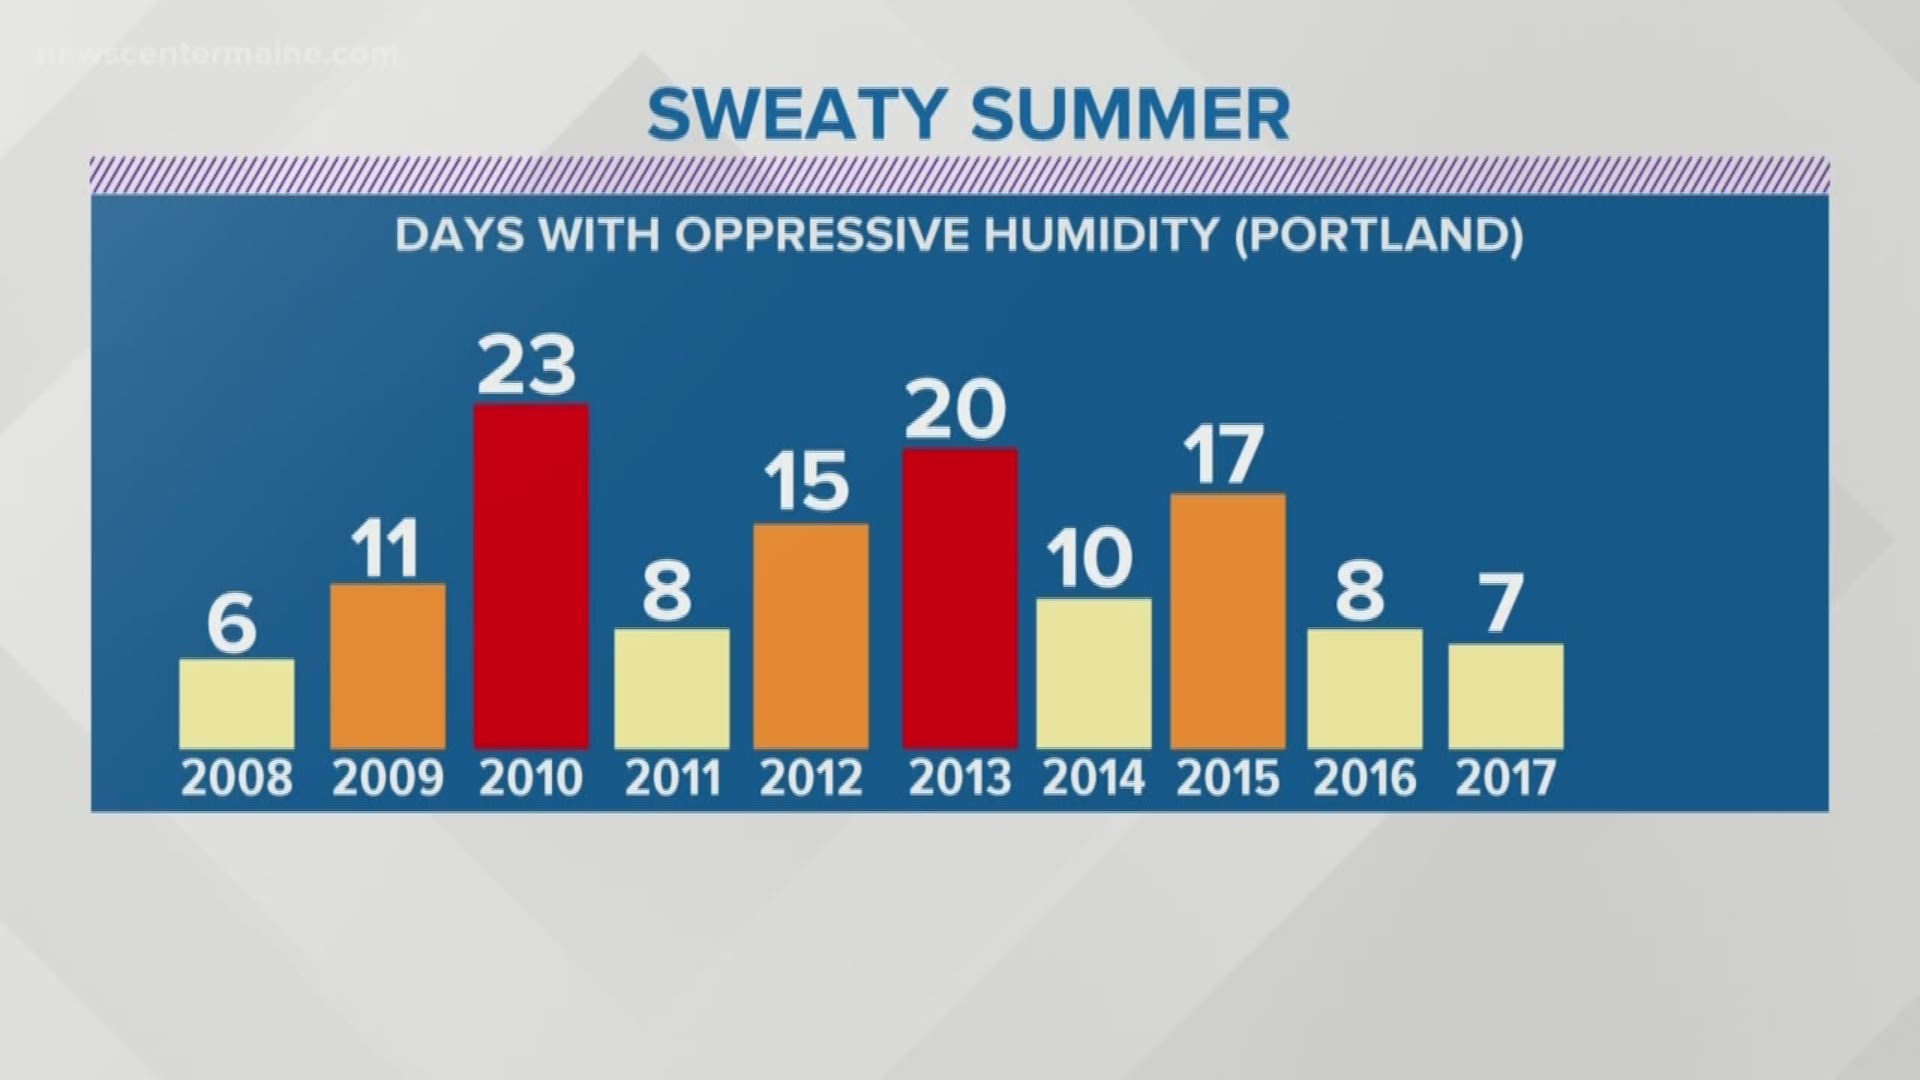 How bad has the humidity been this year?